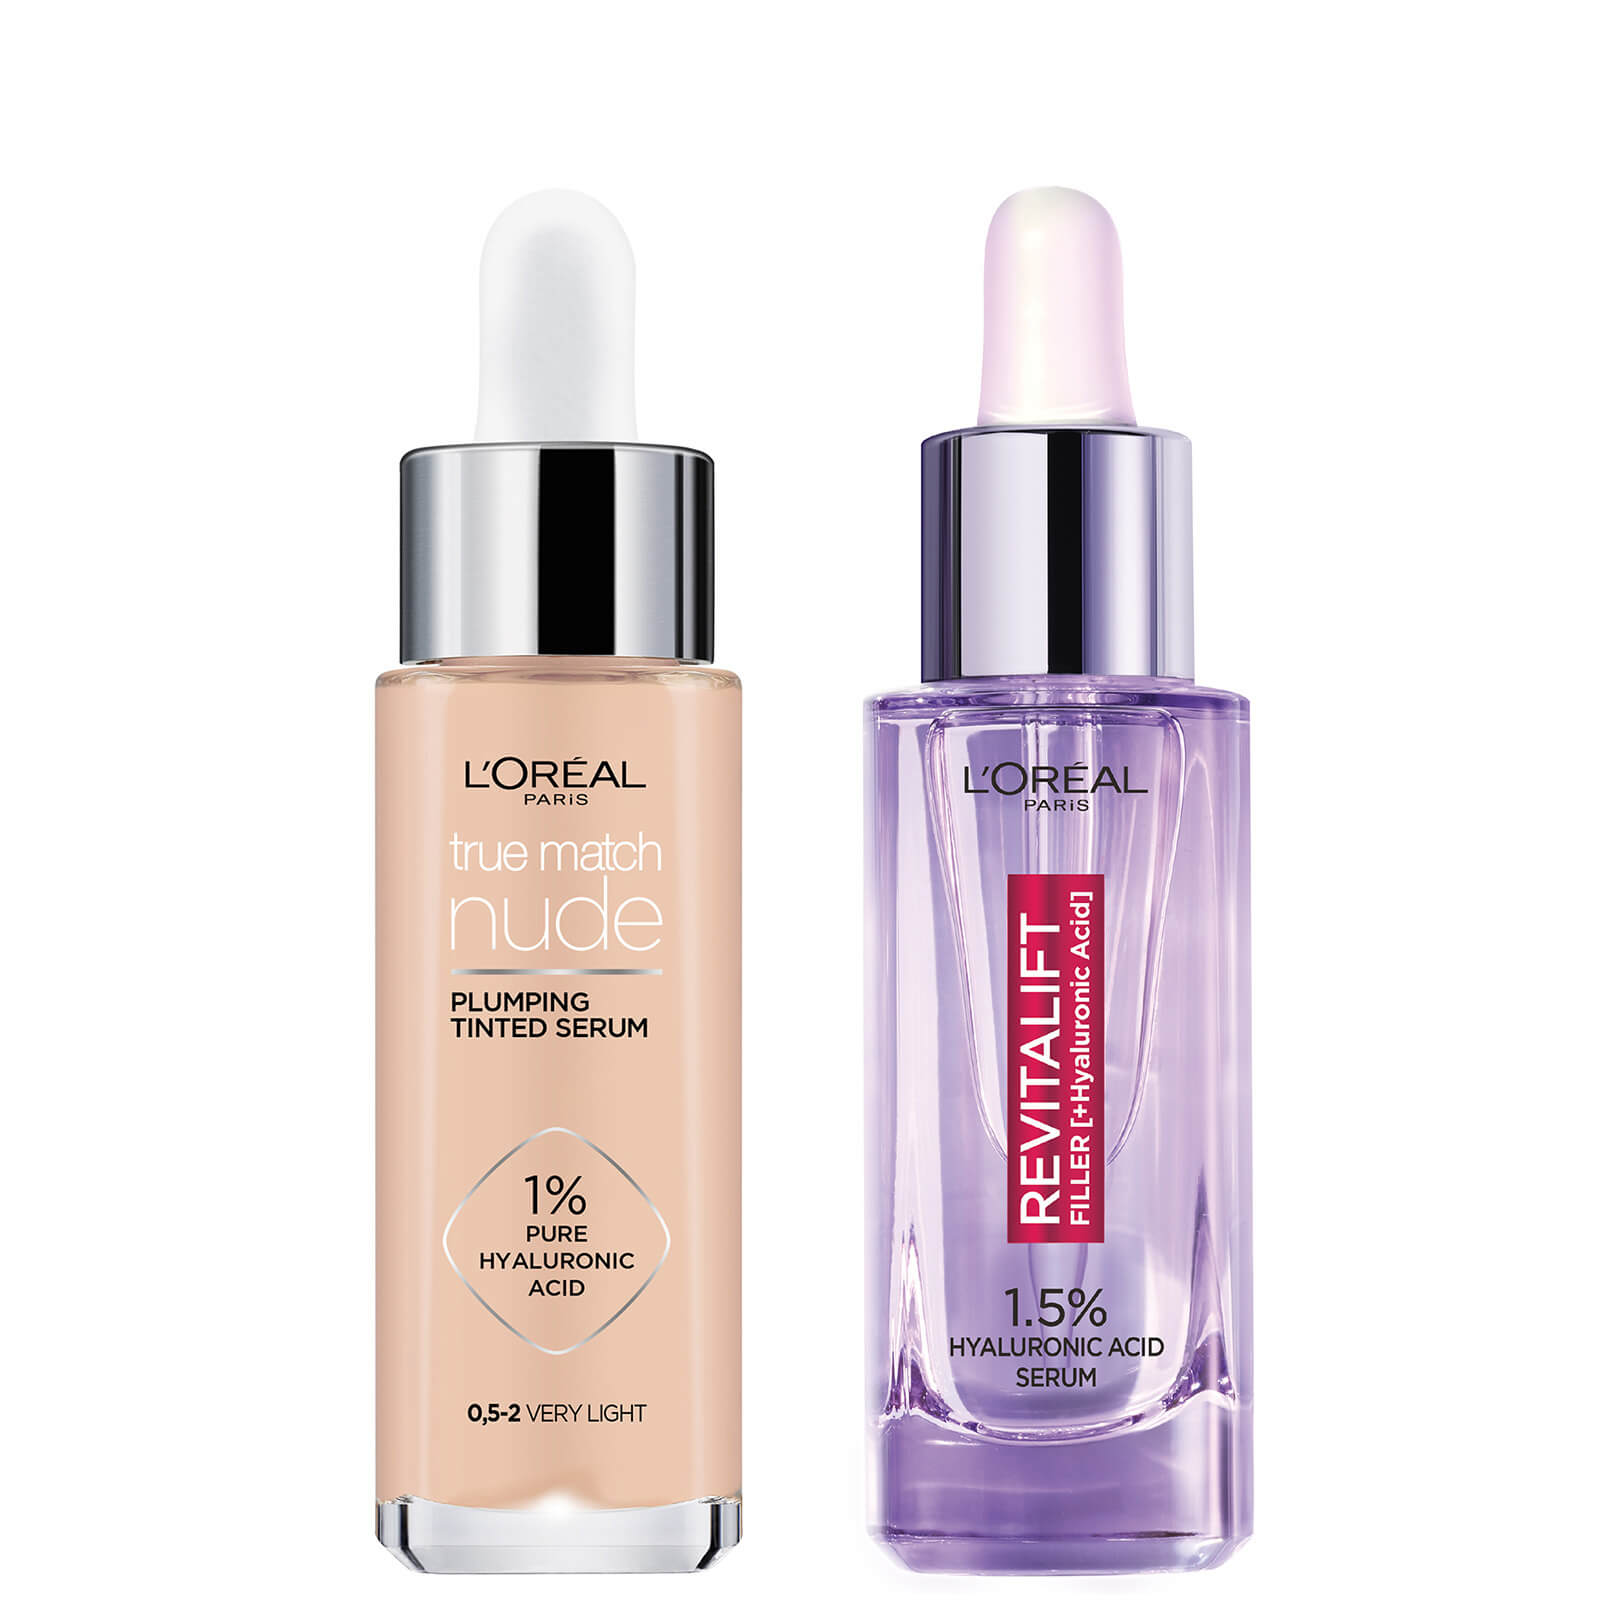 Image of L'Oreal Paris Hyaluronic Acid Revitalift Filler Serum and True Match Tinted Serum Duo (Various Shades) - 0.5-2 Very Light